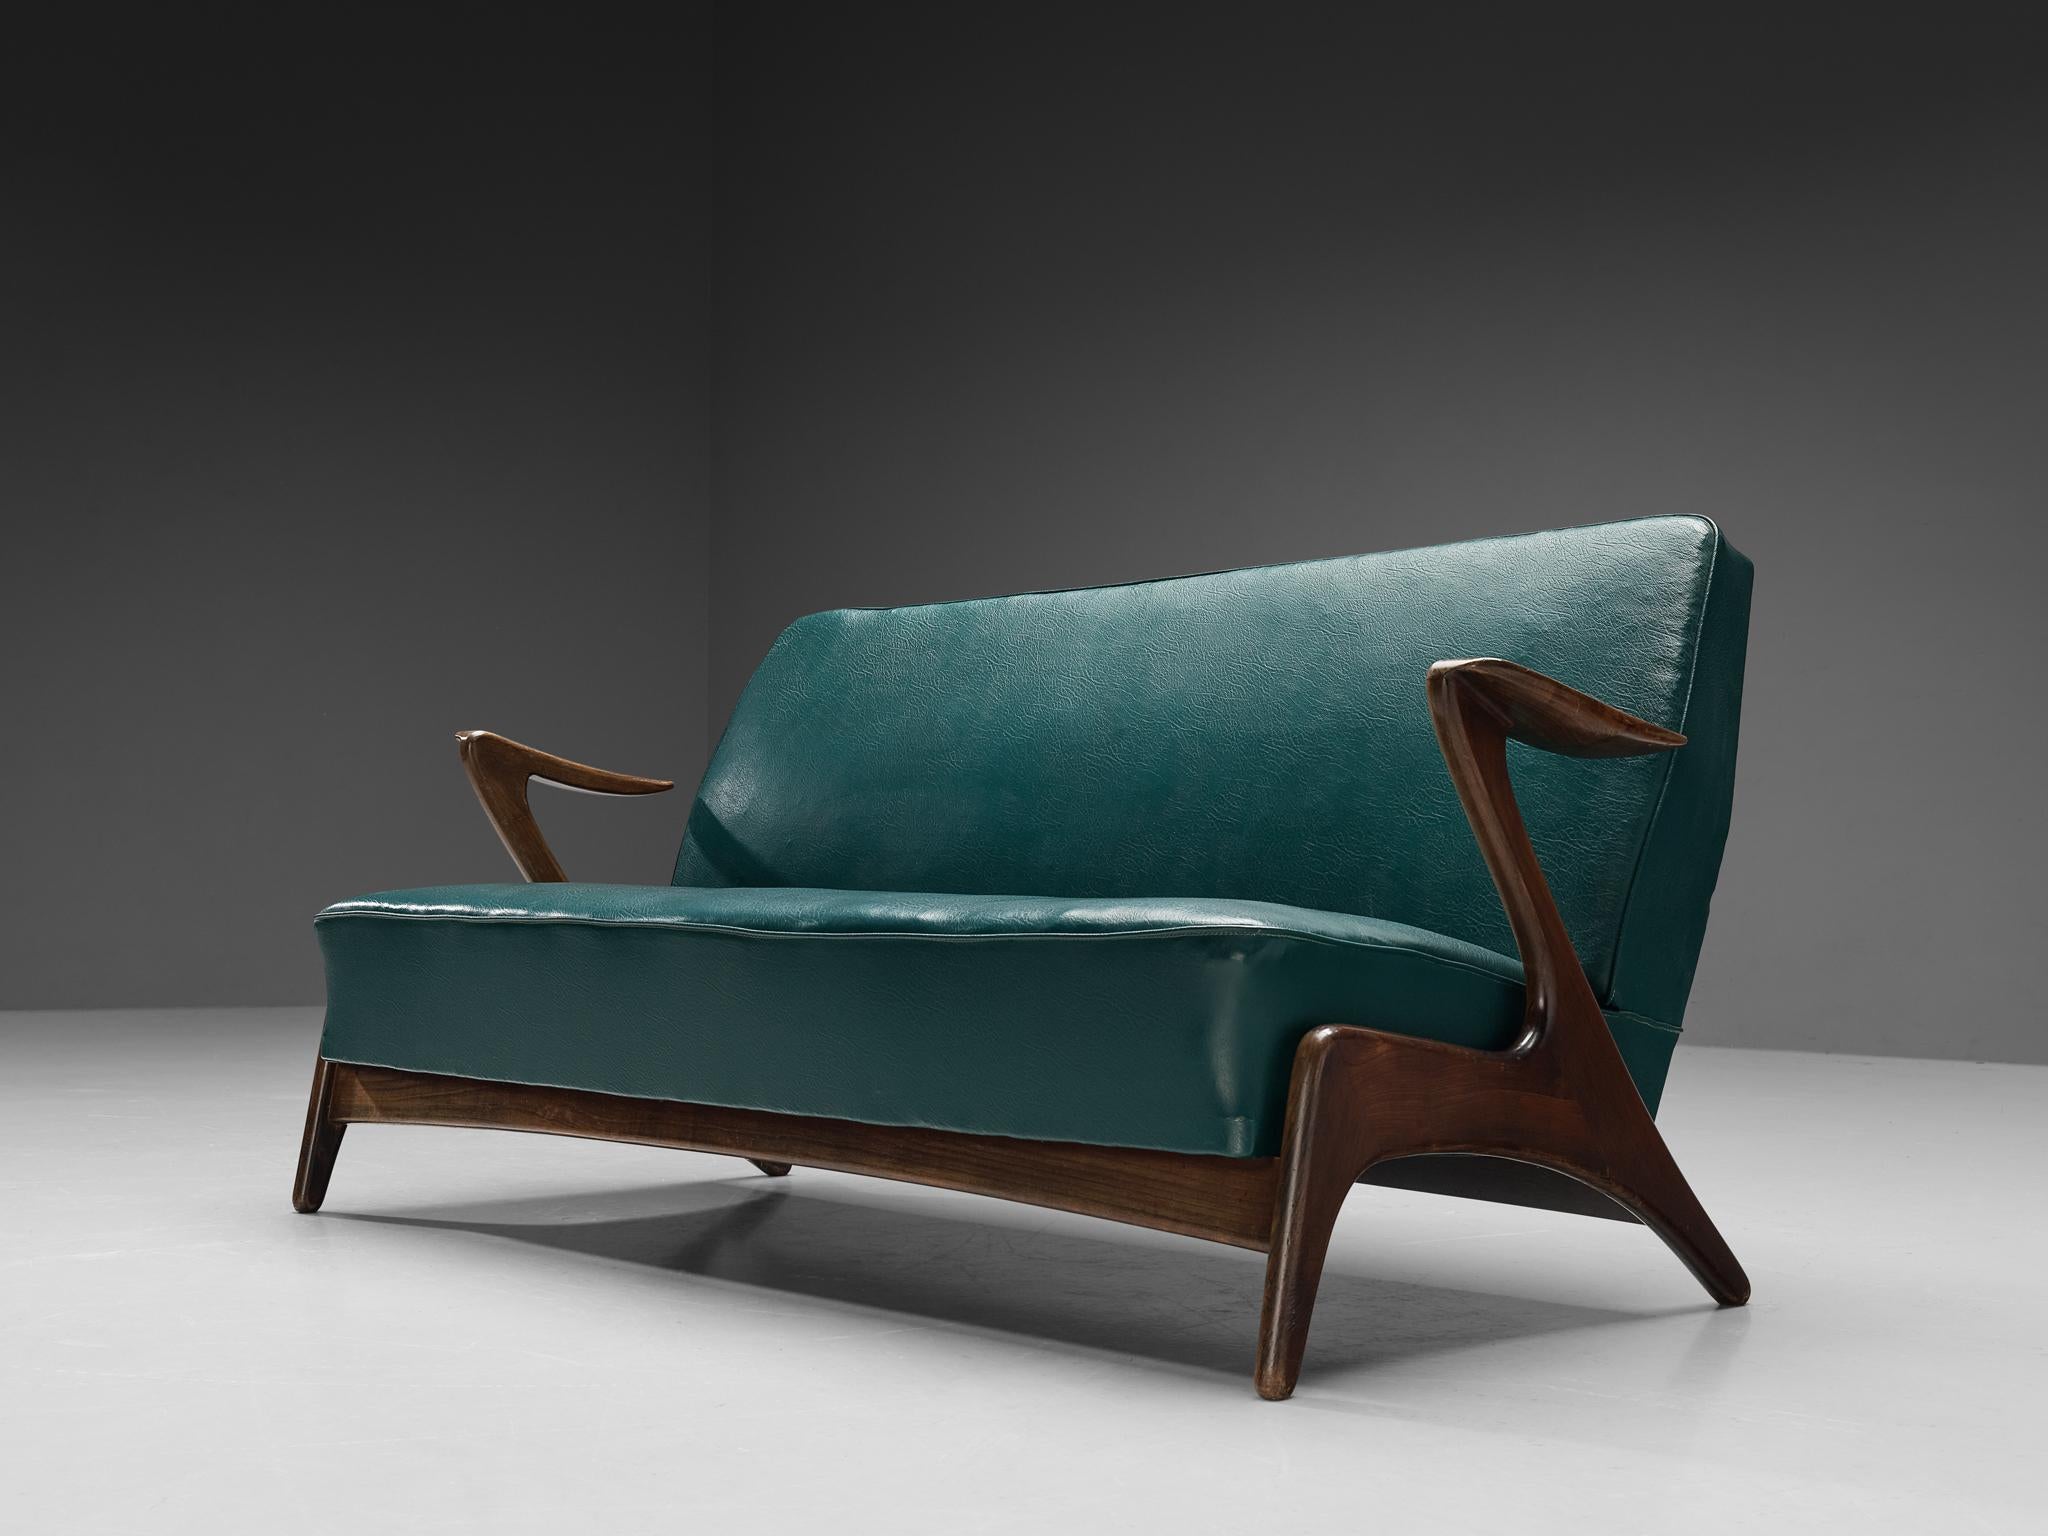 Sofa, leatherette, stained wood, Scandinavia, 1960s 

This sofa embodies a splendid construction based on curvaceous lines and round corners. The wooden armrests and legs are organically built featuring a subtle motion established by slightly